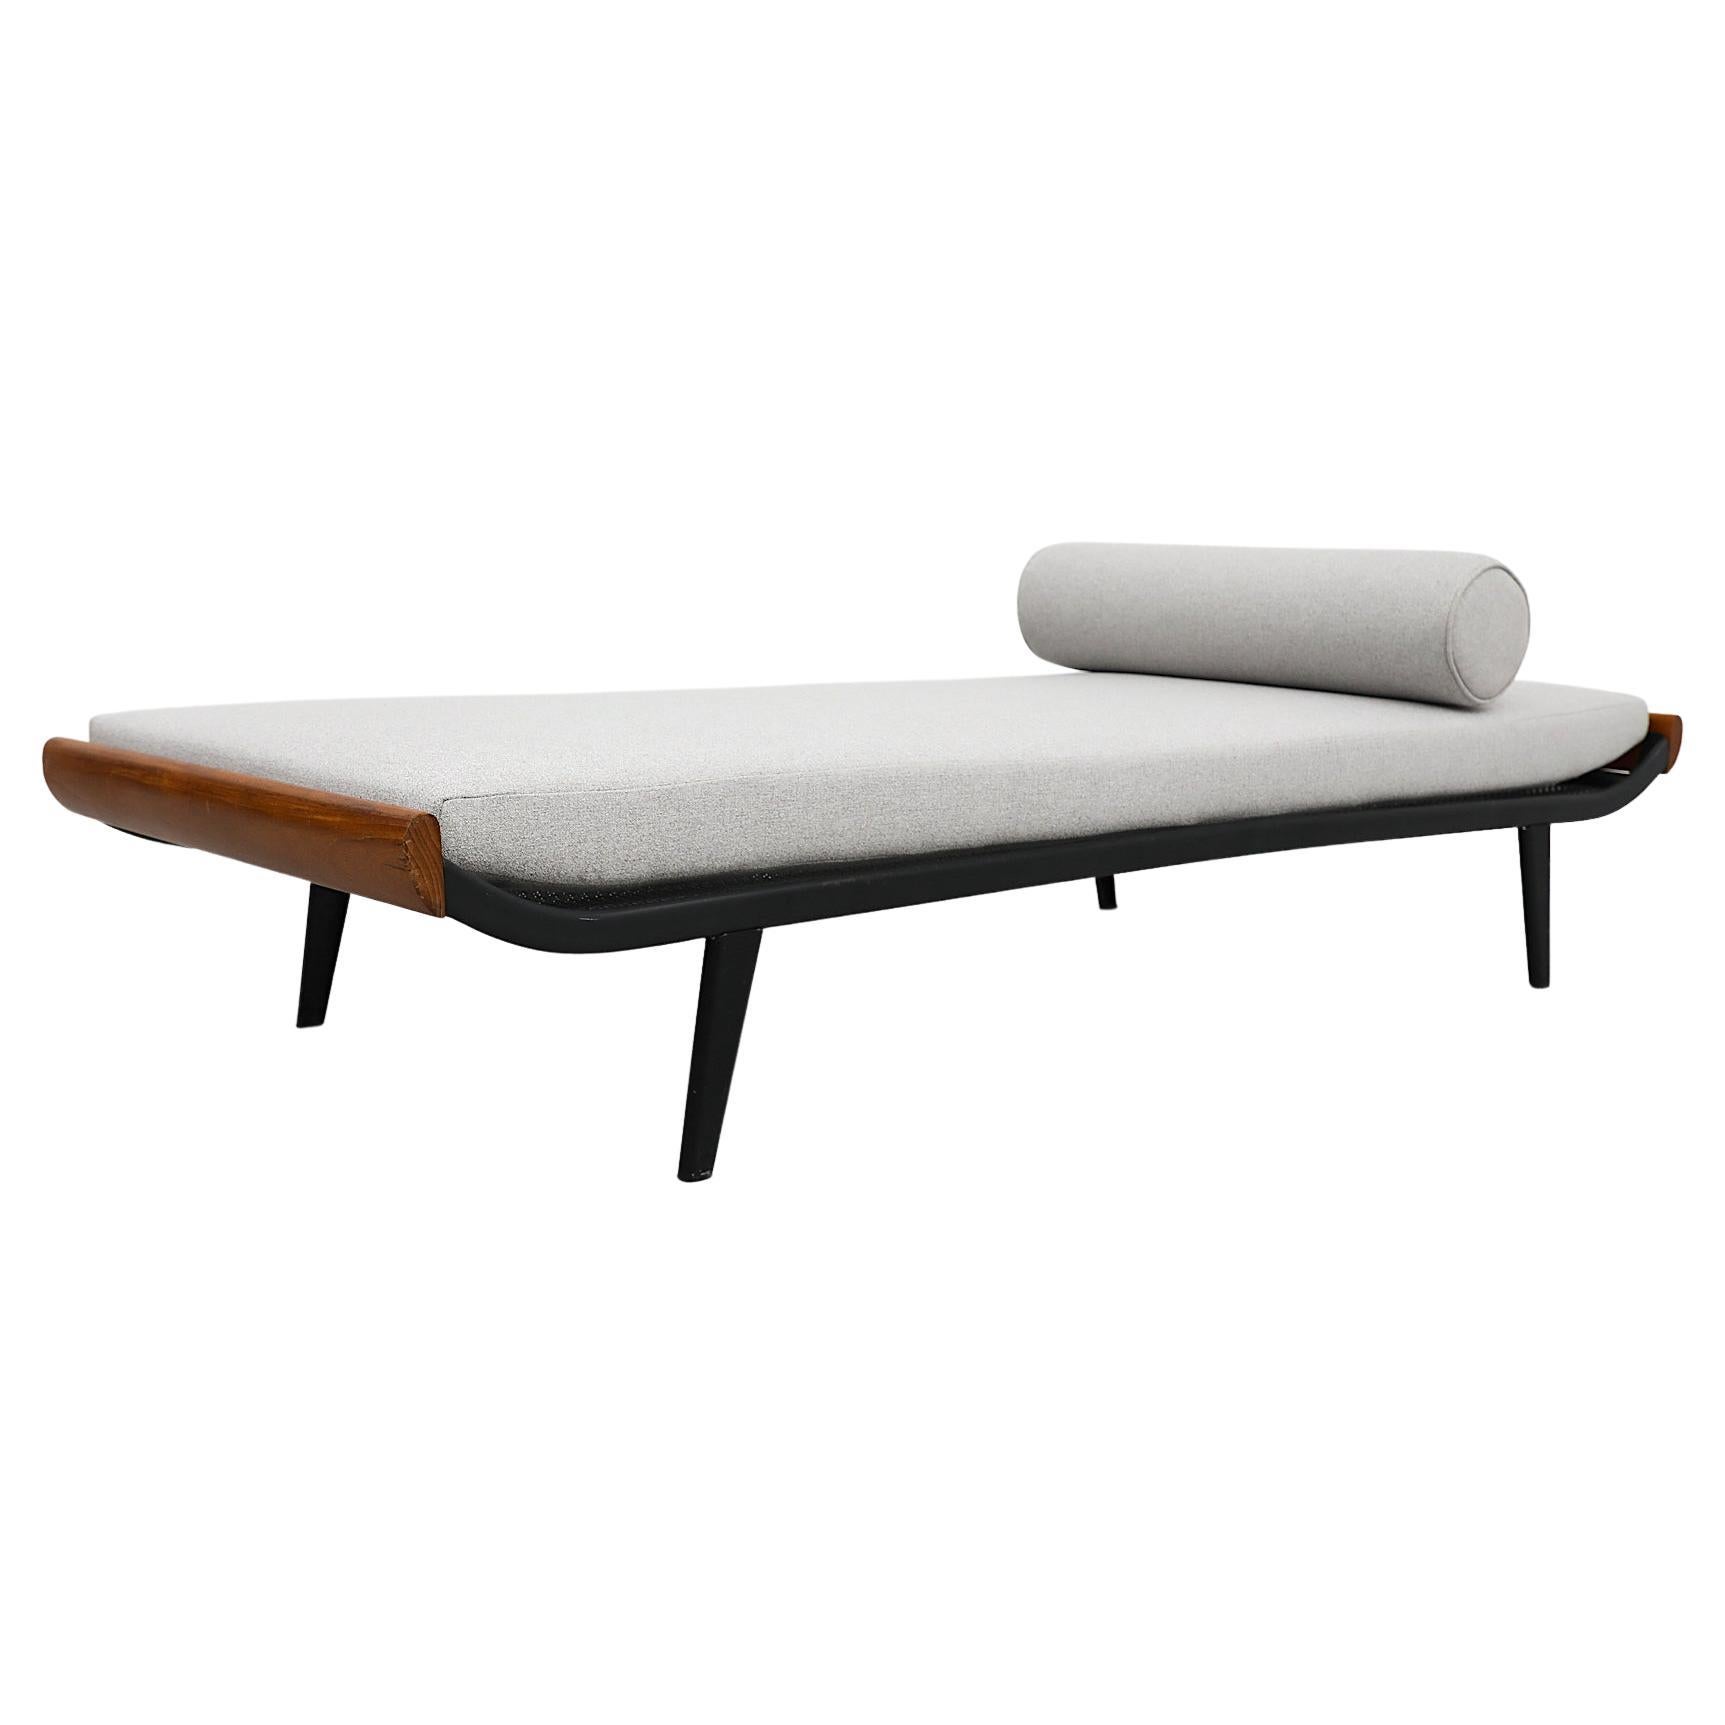 A.R. Cordemeyer "Cleopatra" Daybed for Auping at 1stDibs